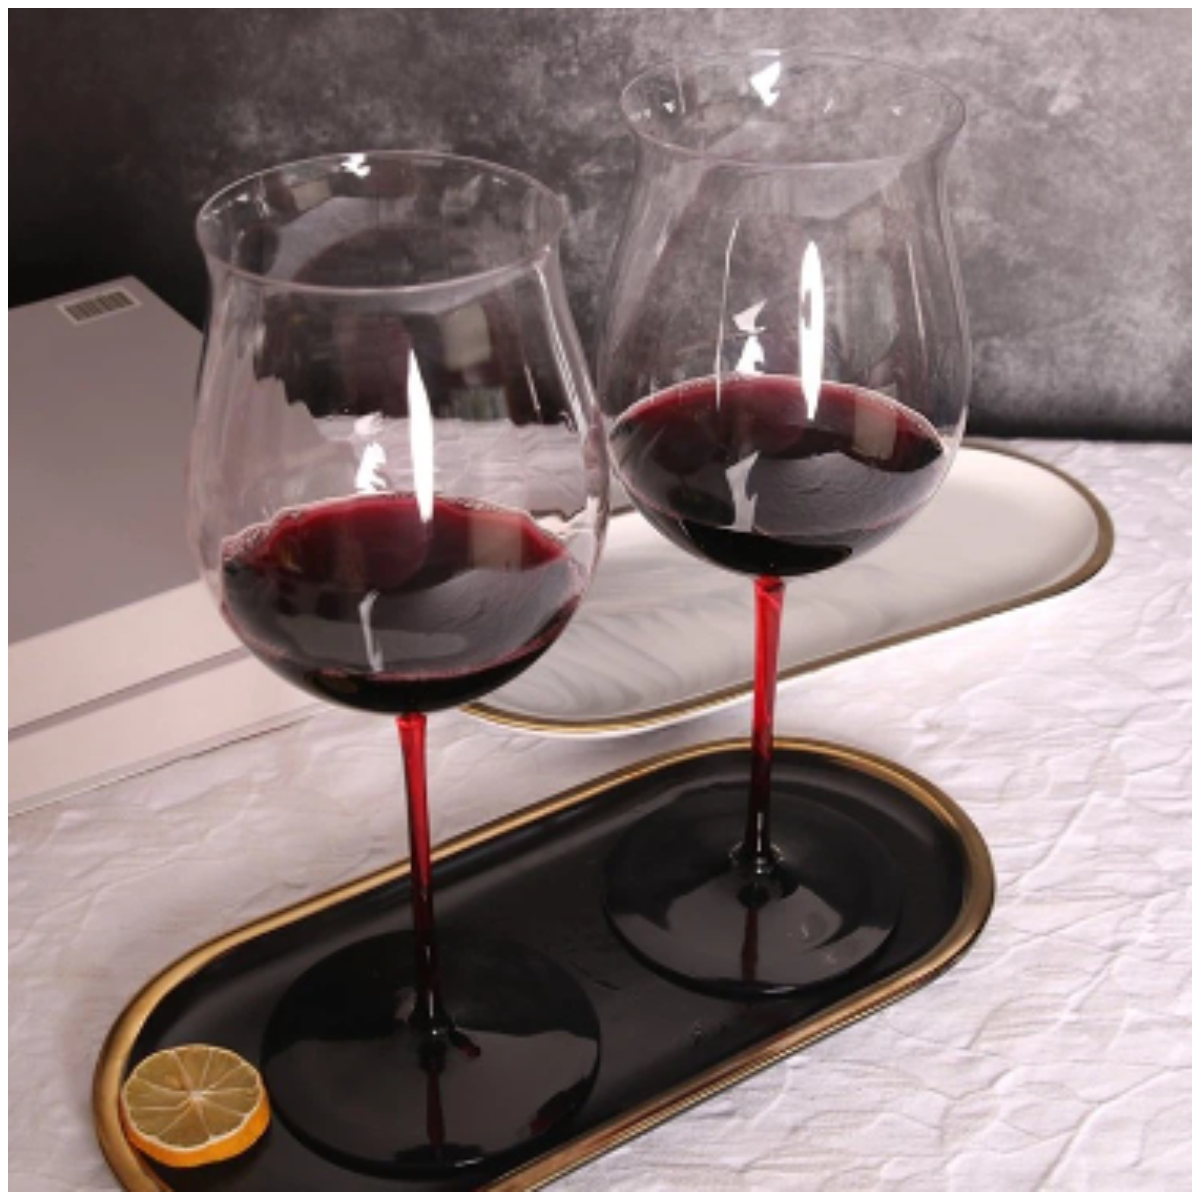 Two burgundy glasses on a serving tray